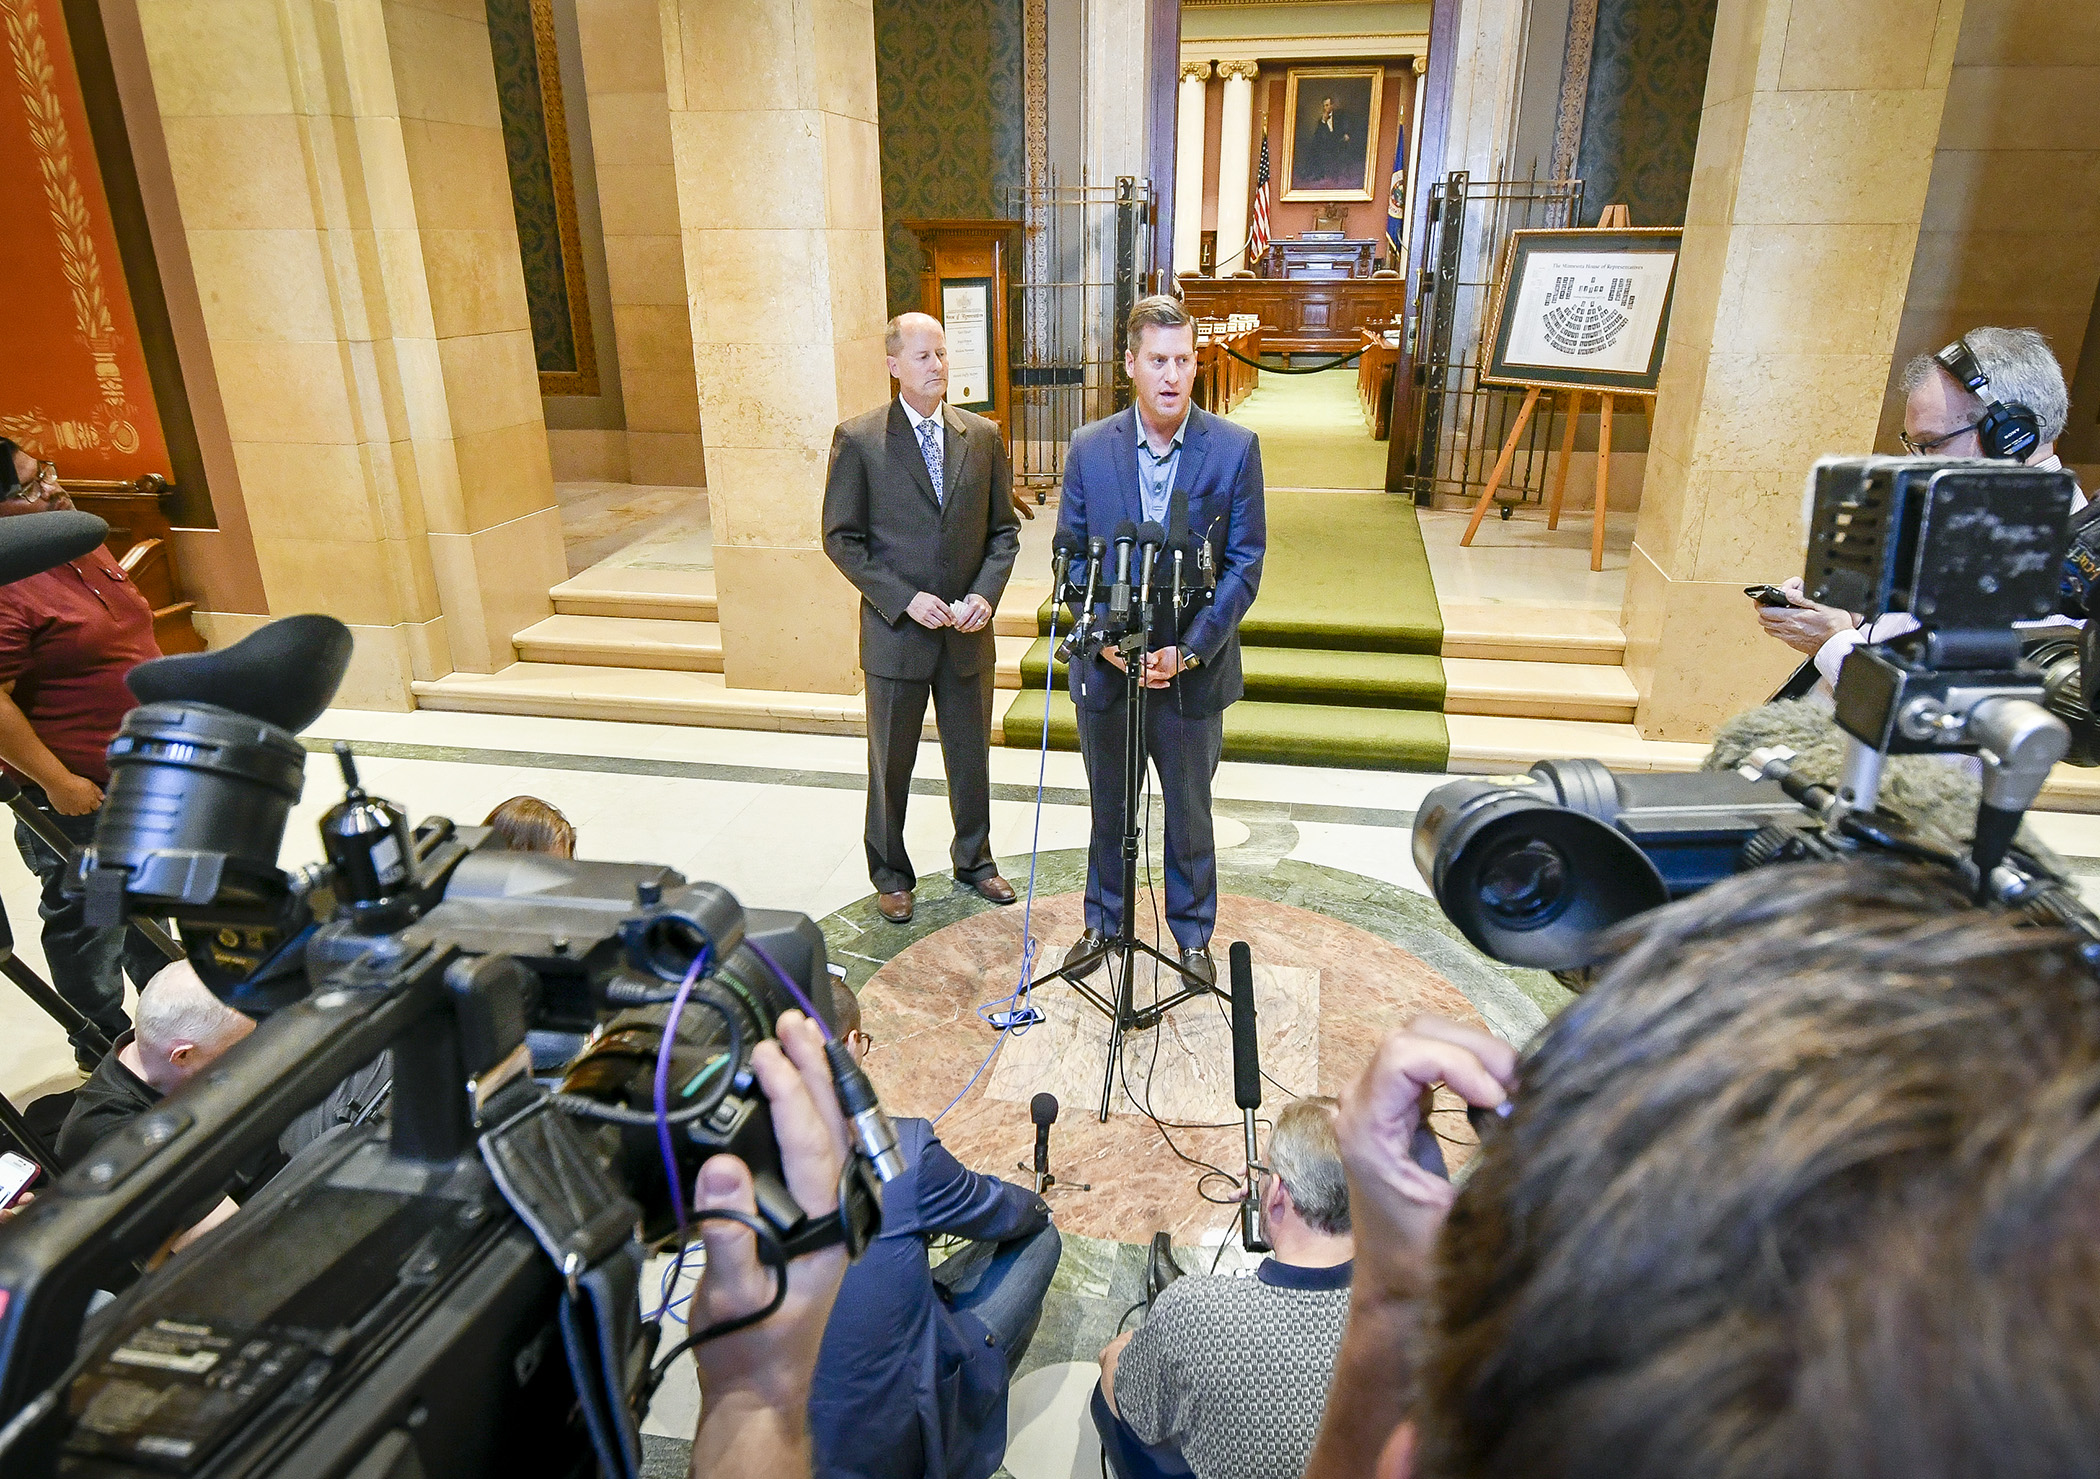 House Speaker Kurt Daudt and Senate Majority Leader Paul Gazelka hold a news conference in front of the House Chamber Sept. 22 to address an impasse in mediation proceedings with Gov. Mark Dayton. Photo by Andrew VonBank